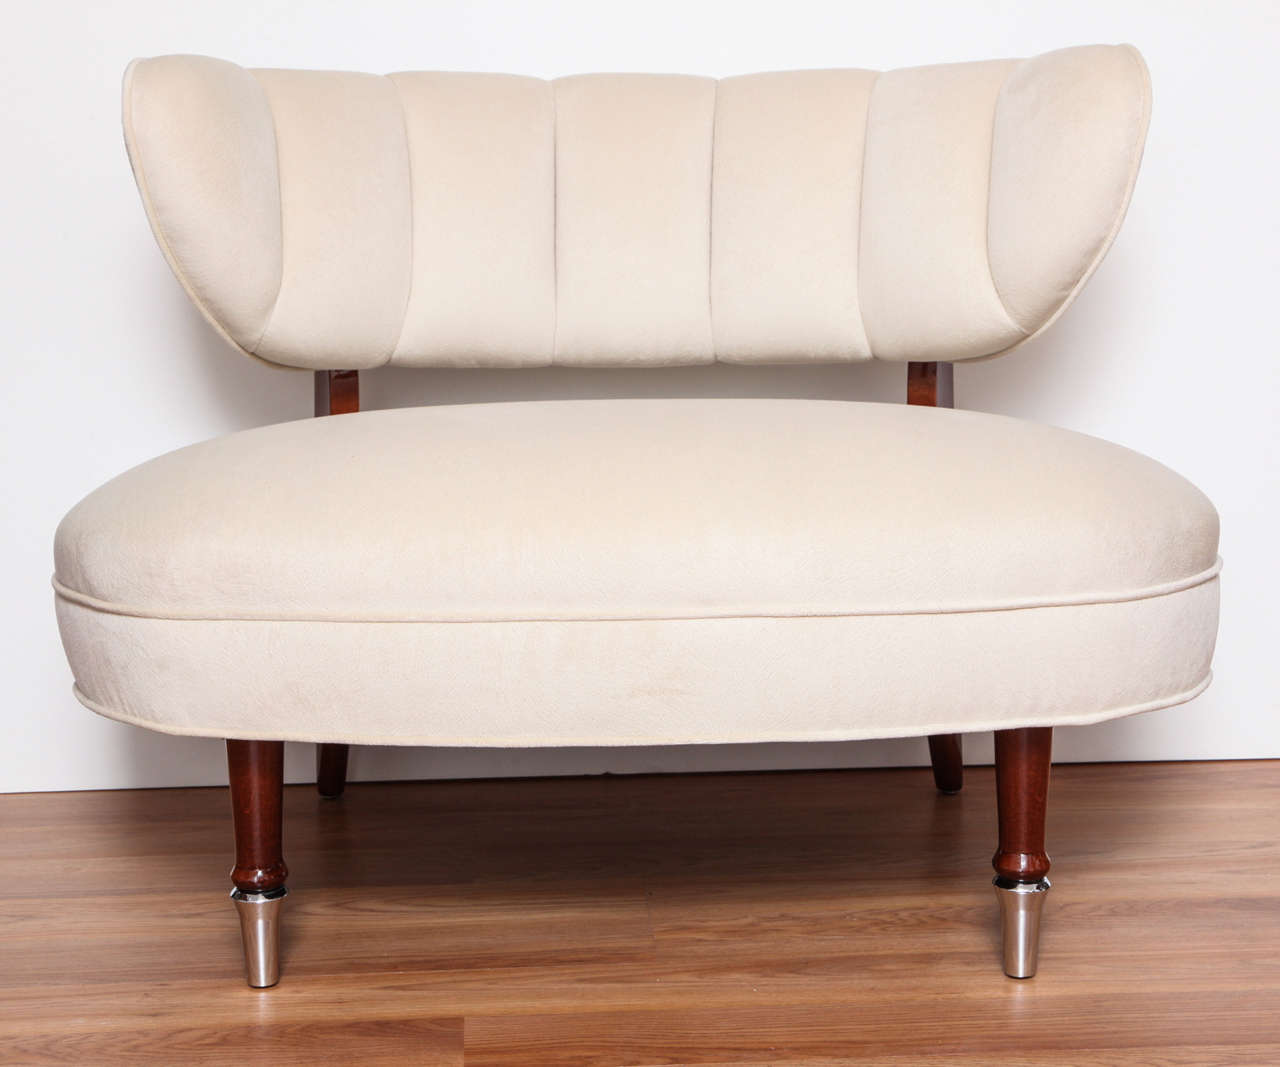 Pair of oval channeled back oval tub chairs in the 